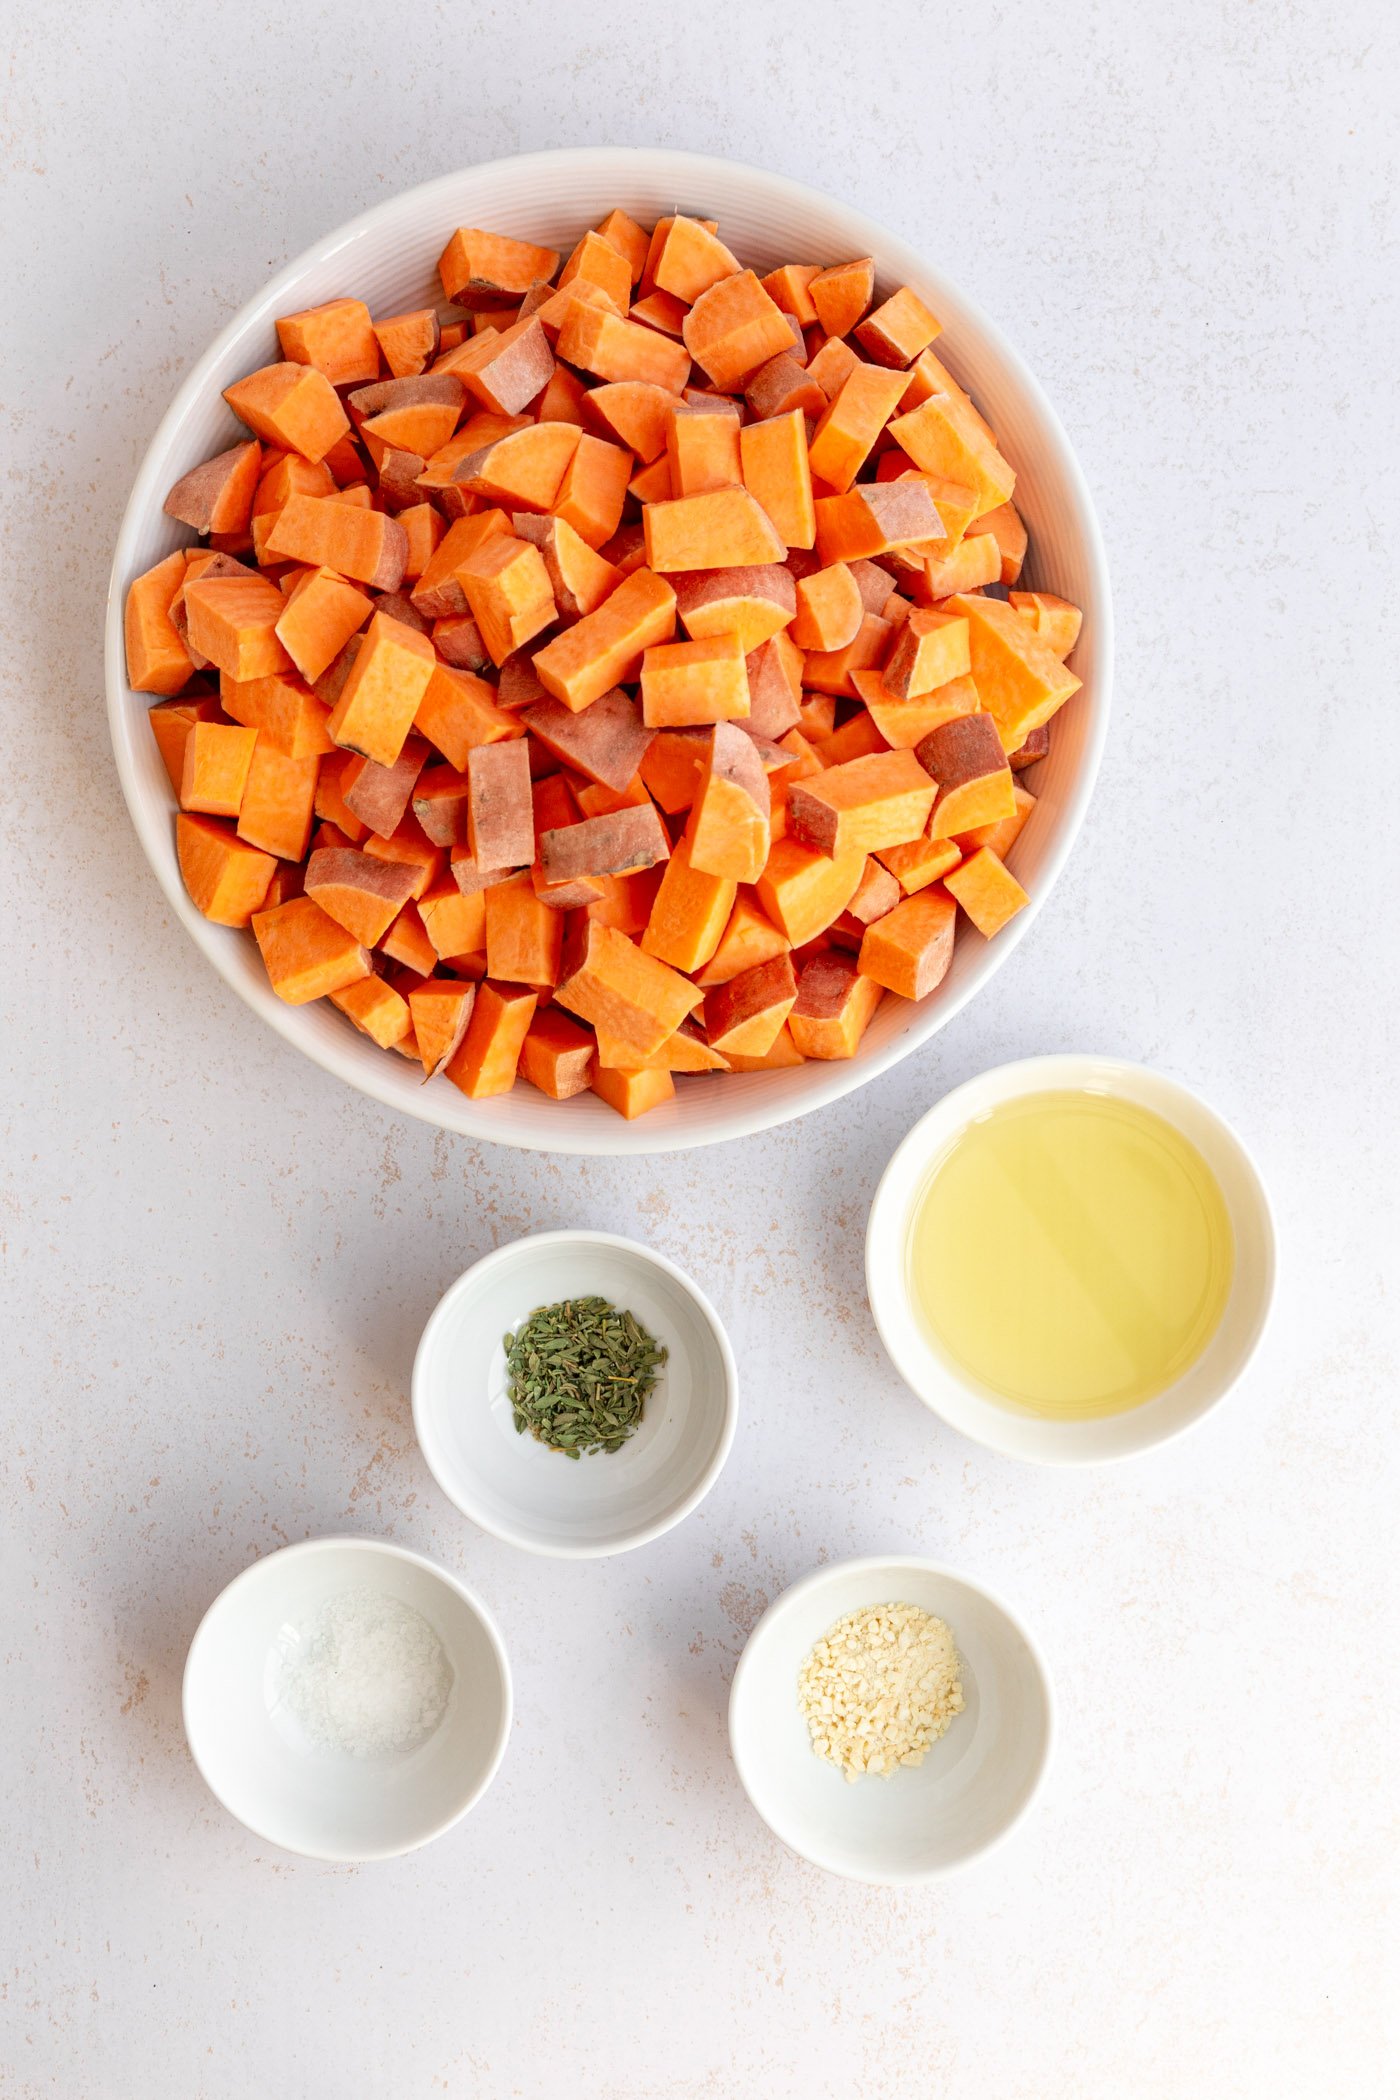 Ingredients for roasted diced sweet potatoes sitting together on a white surface.